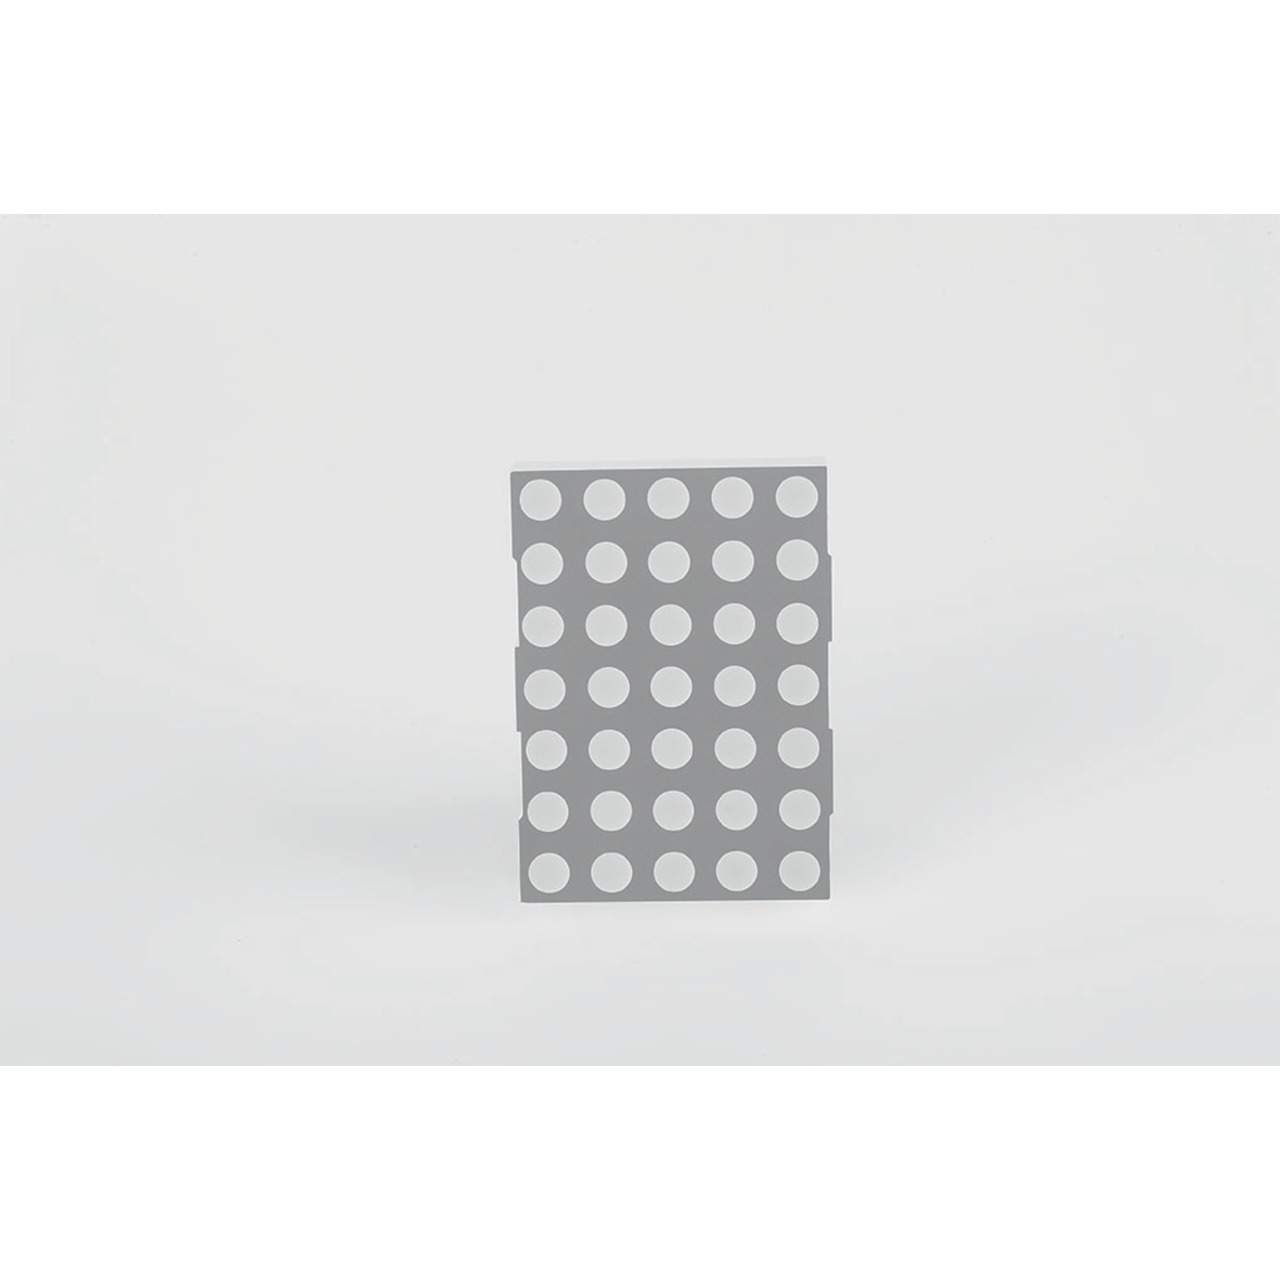 opto devices 5 x 7 LED Dot Matrix Display OM20571BUHR-21-L4-0- rot- 53-10 mm